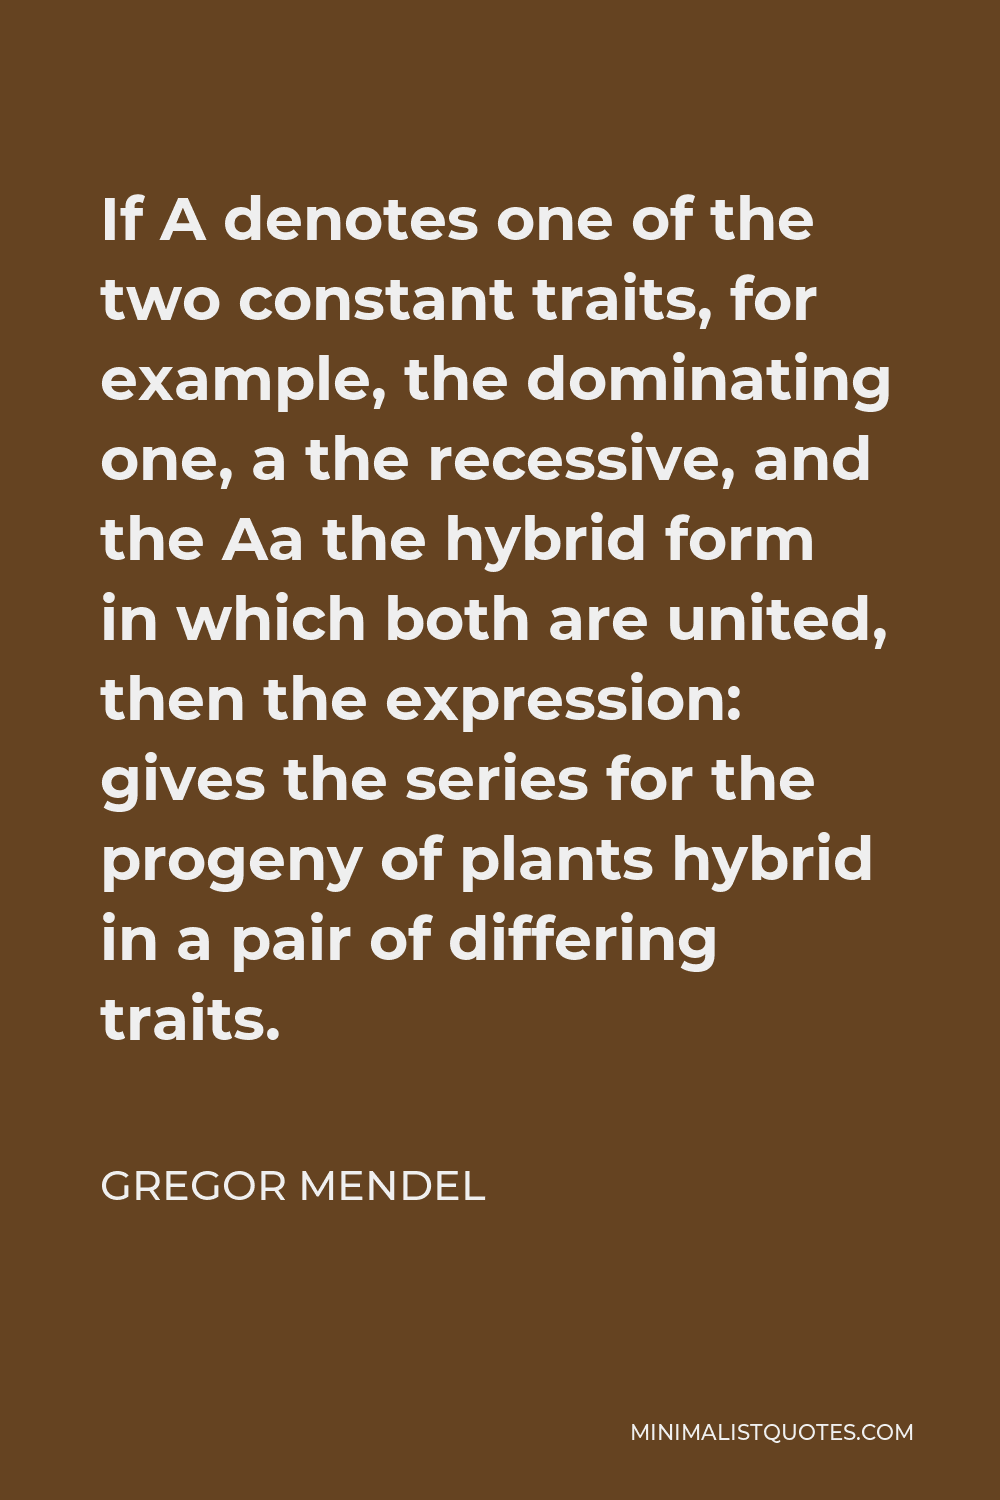 Gregor Mendel Quote - If A denotes one of the two constant traits, for example, the dominating one, a the recessive, and the Aa the hybrid form in which both are united, then the expression: gives the series for the progeny of plants hybrid in a pair of differing traits.